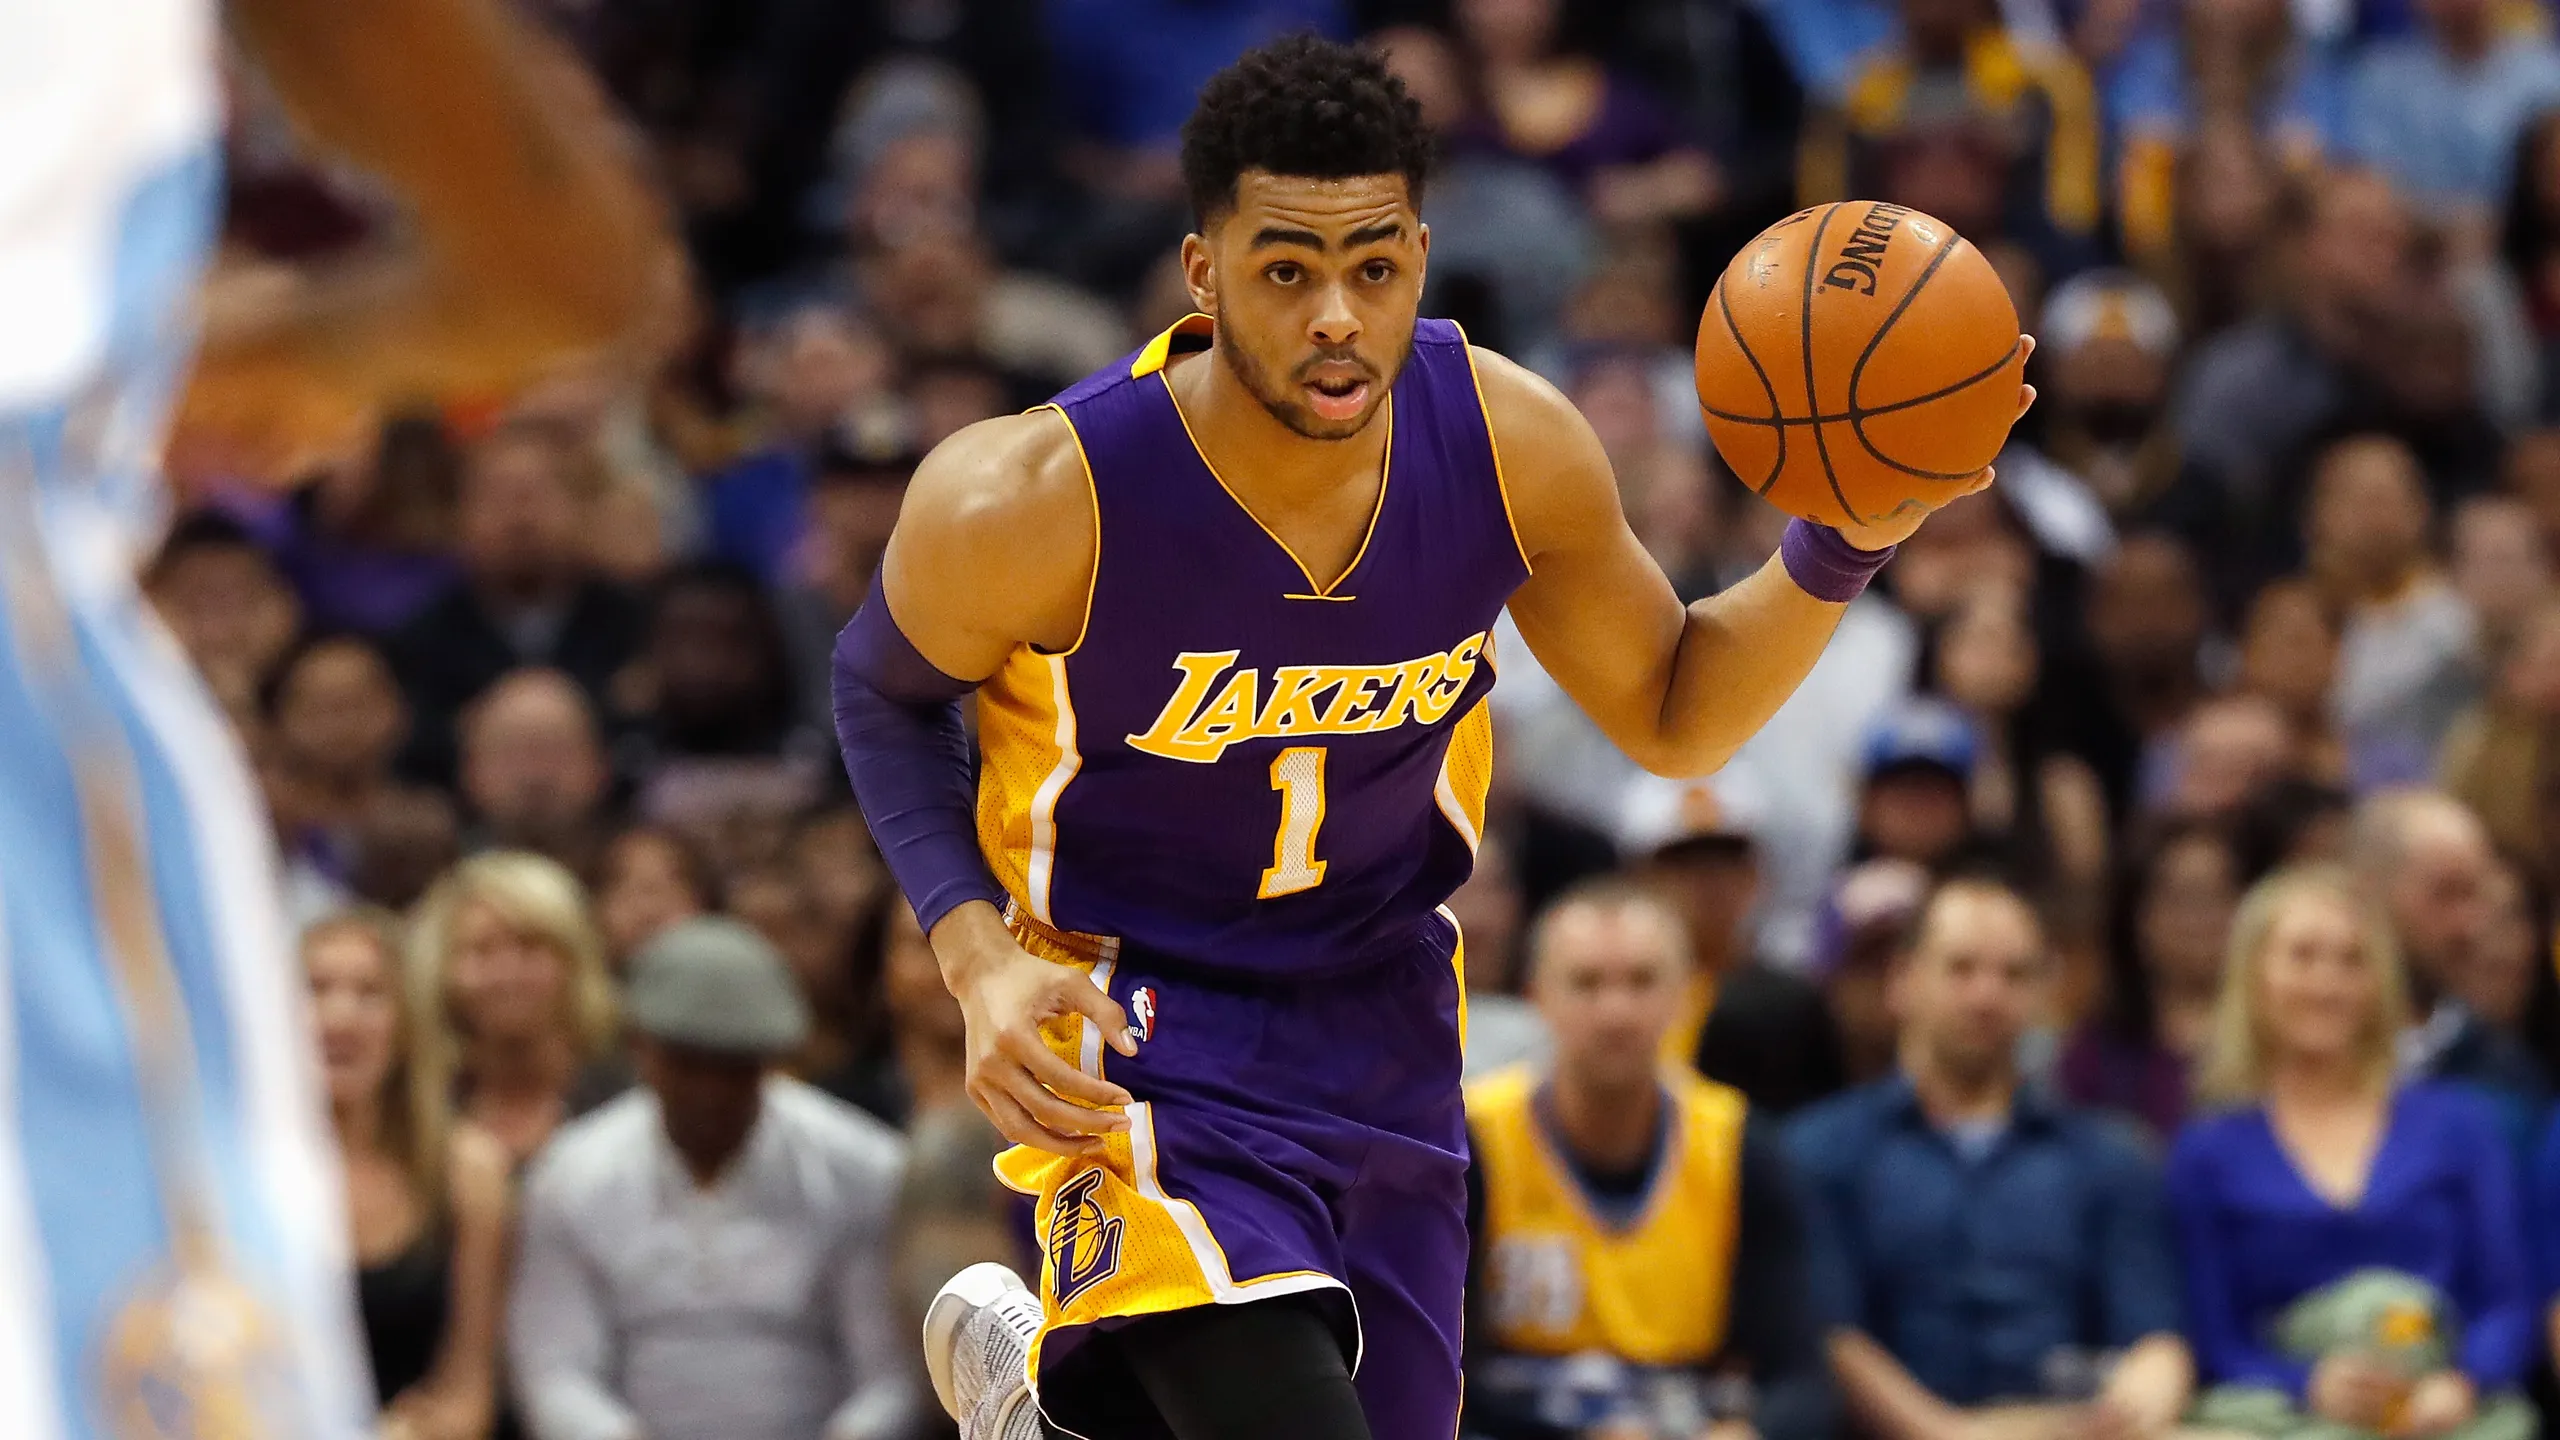 NBA Insider Discusses D'Angelo Russell's Uncertain Future with the Lakers